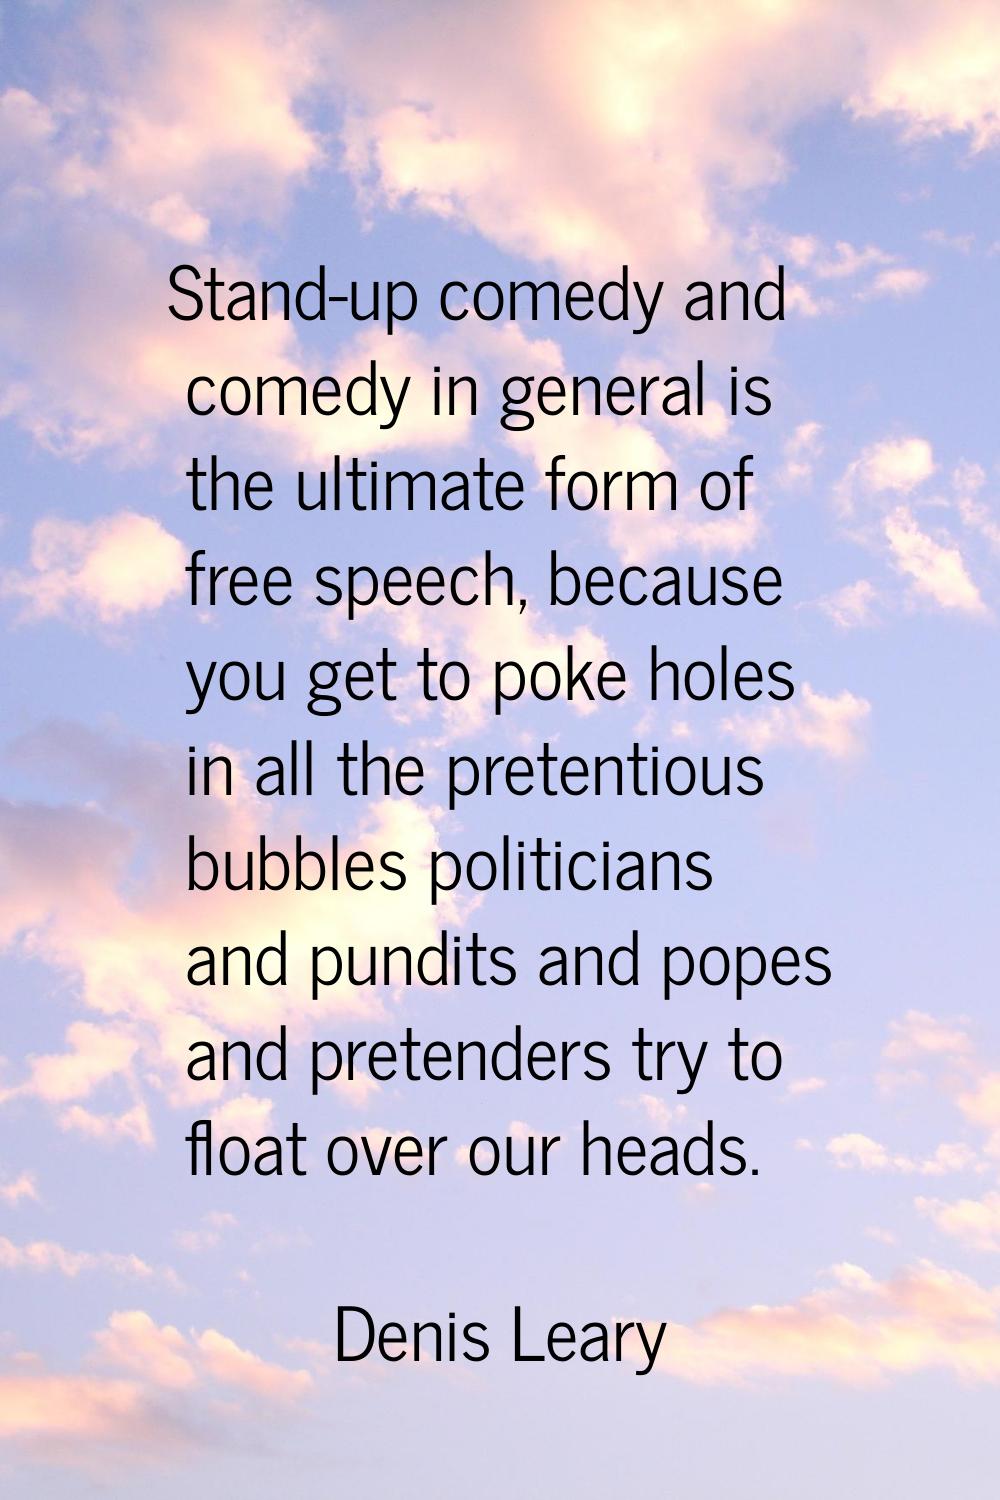 Stand-up comedy and comedy in general is the ultimate form of free speech, because you get to poke 